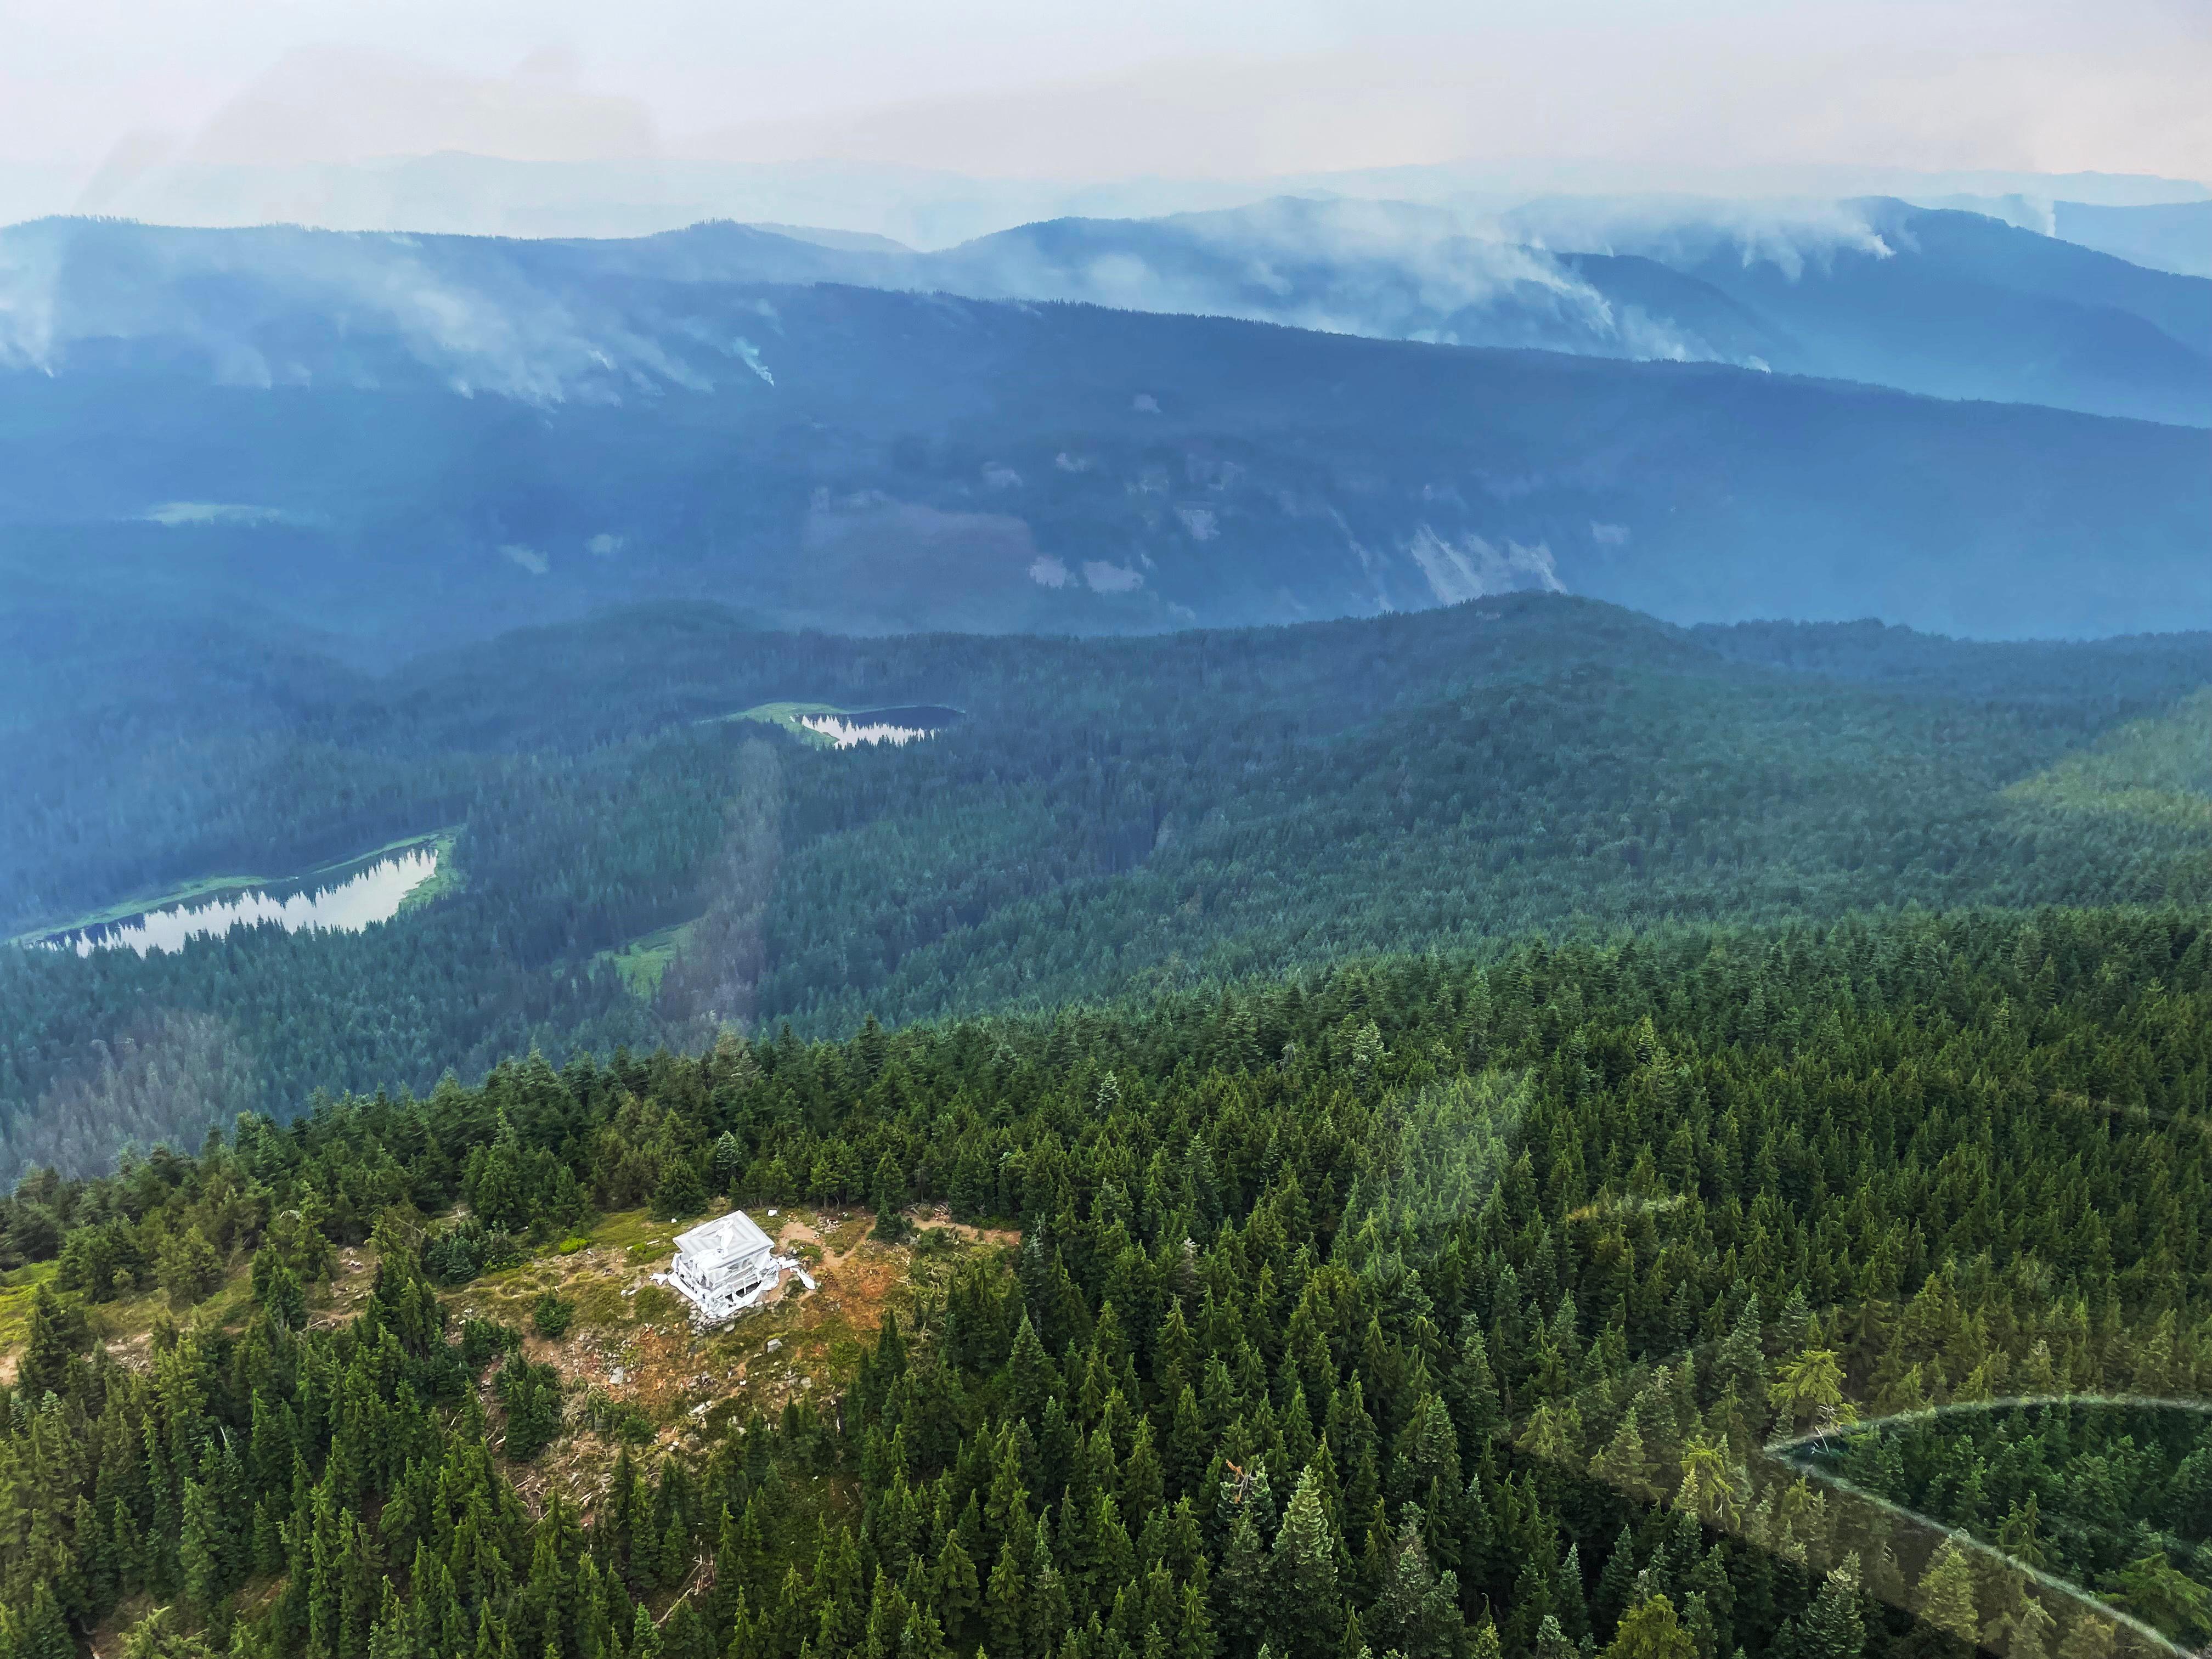 An aerial photograph showing fire lookout tower wrapped in protective foil. Smoke can be seen drifting up from many places in the forested mountains in the distance.